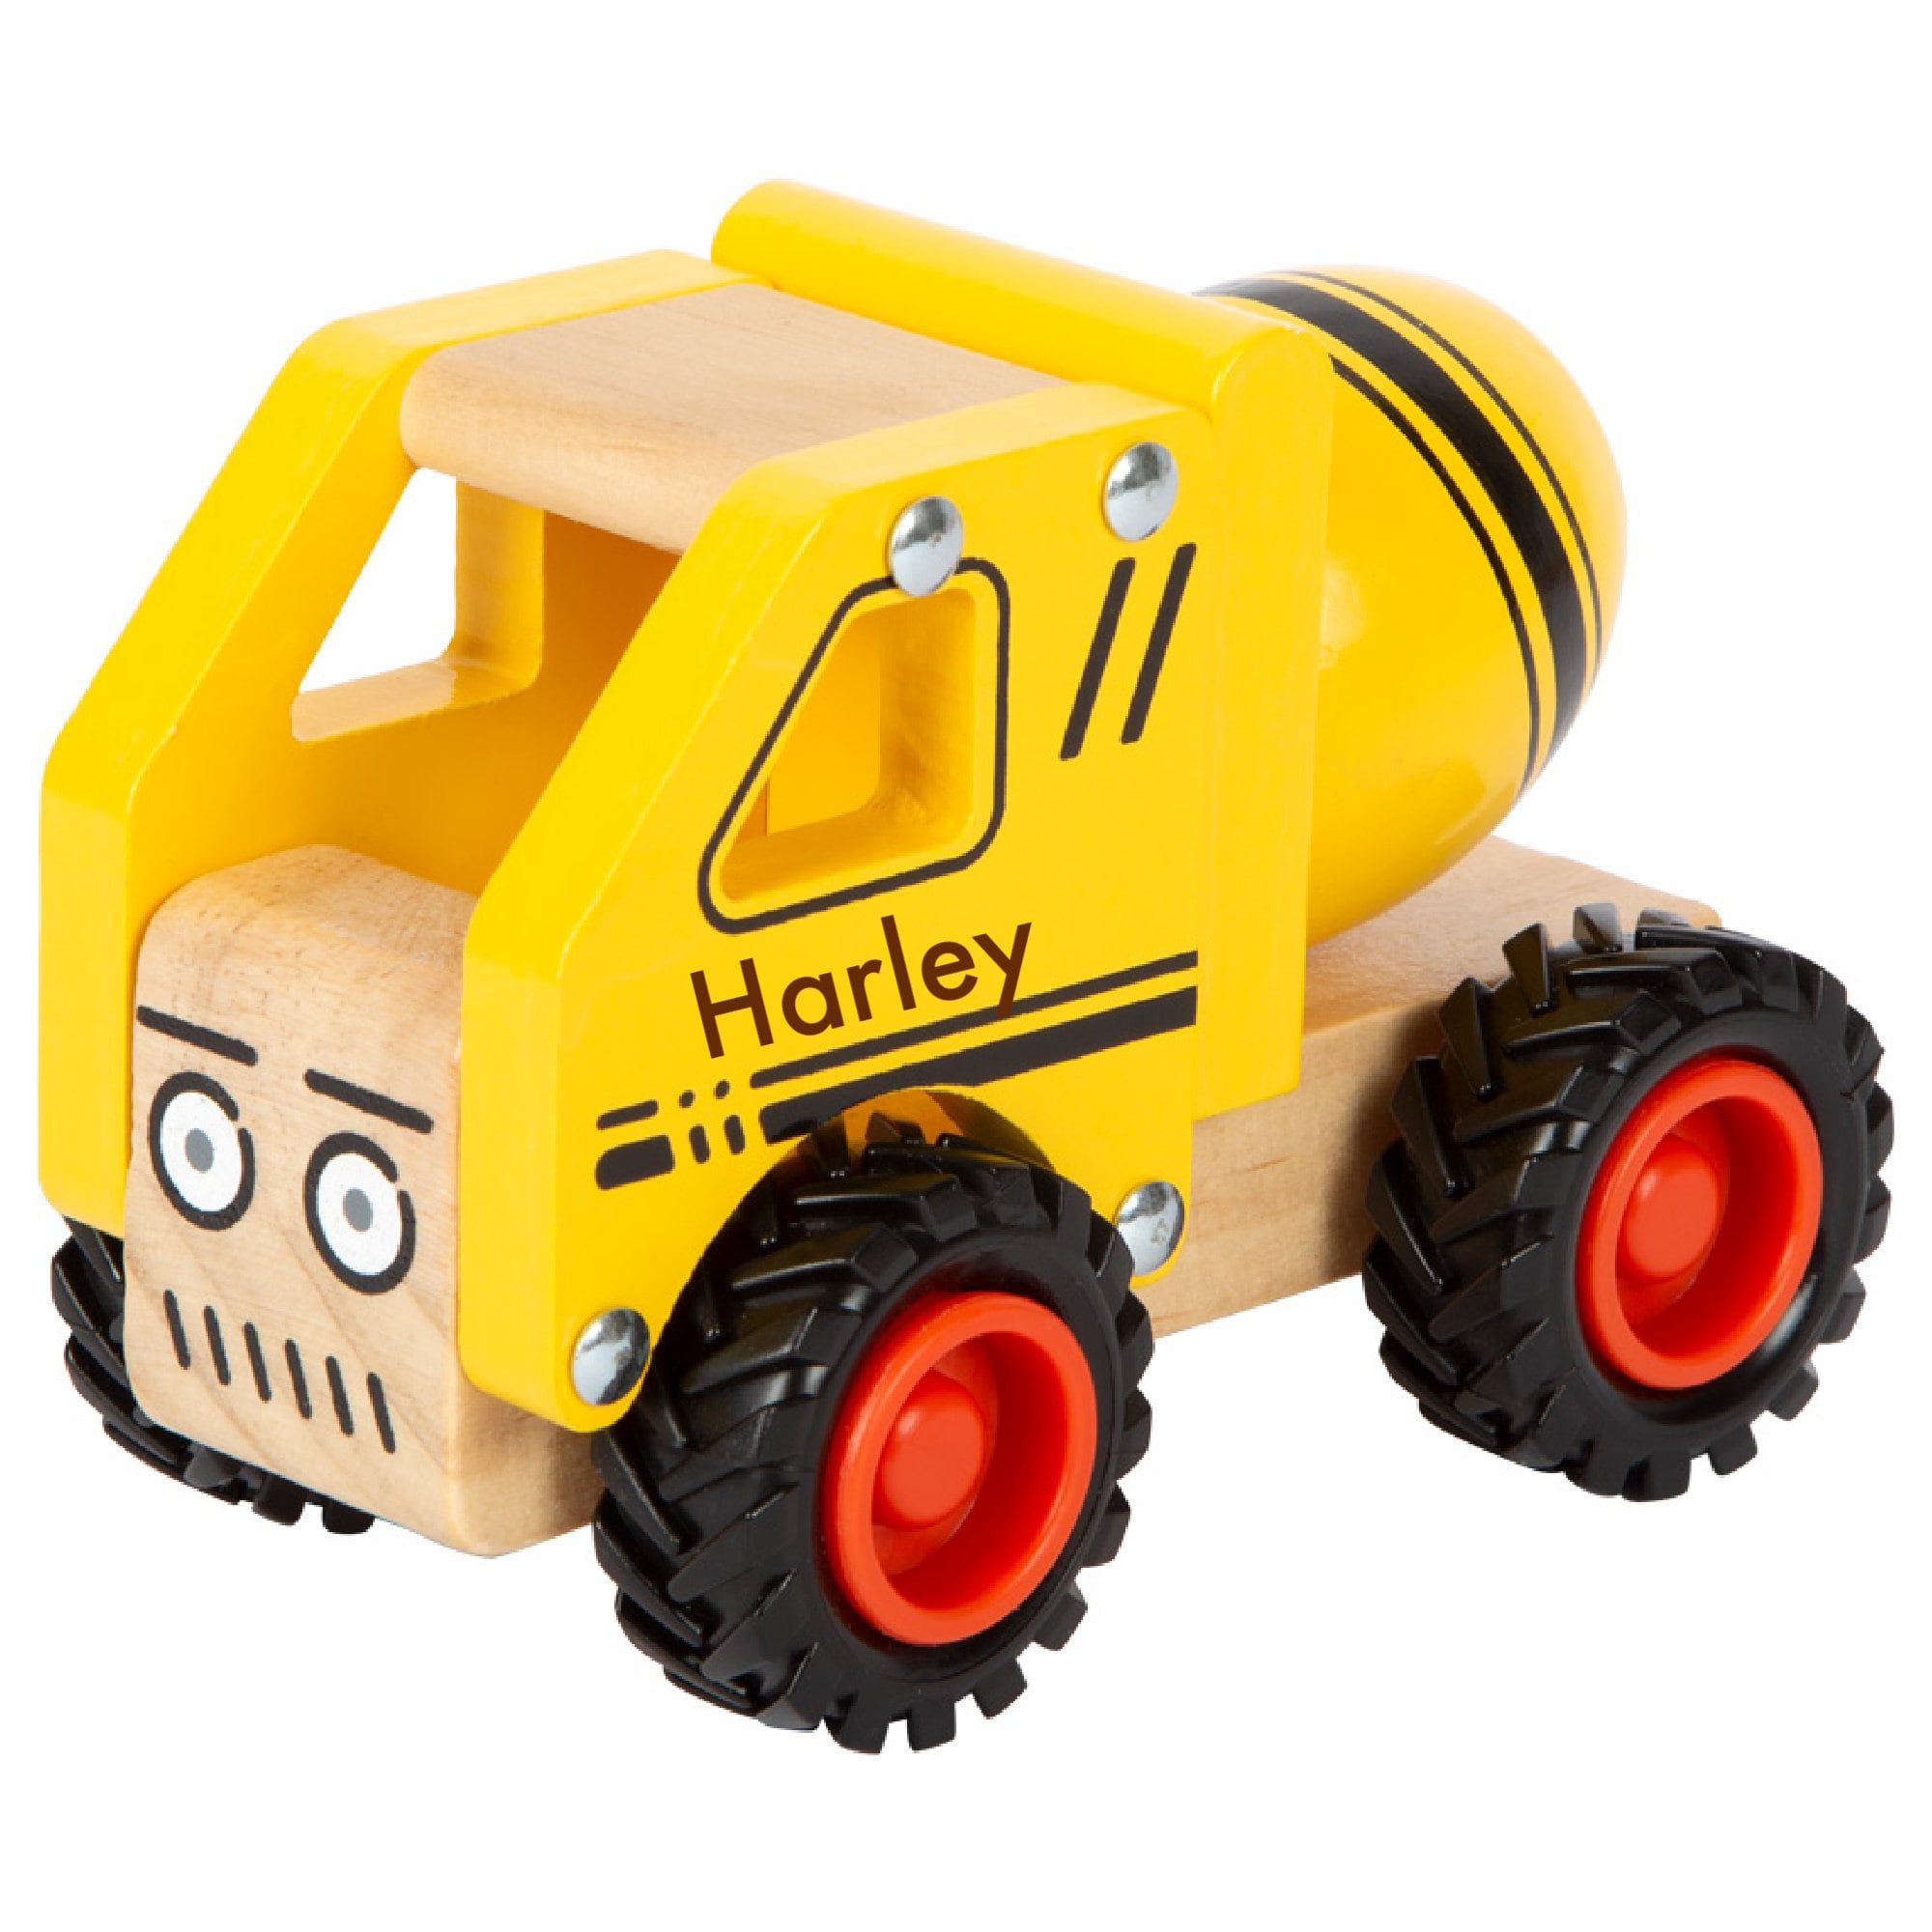 Wooden Toy Cement Mixer : Countryside Gifts, LLC